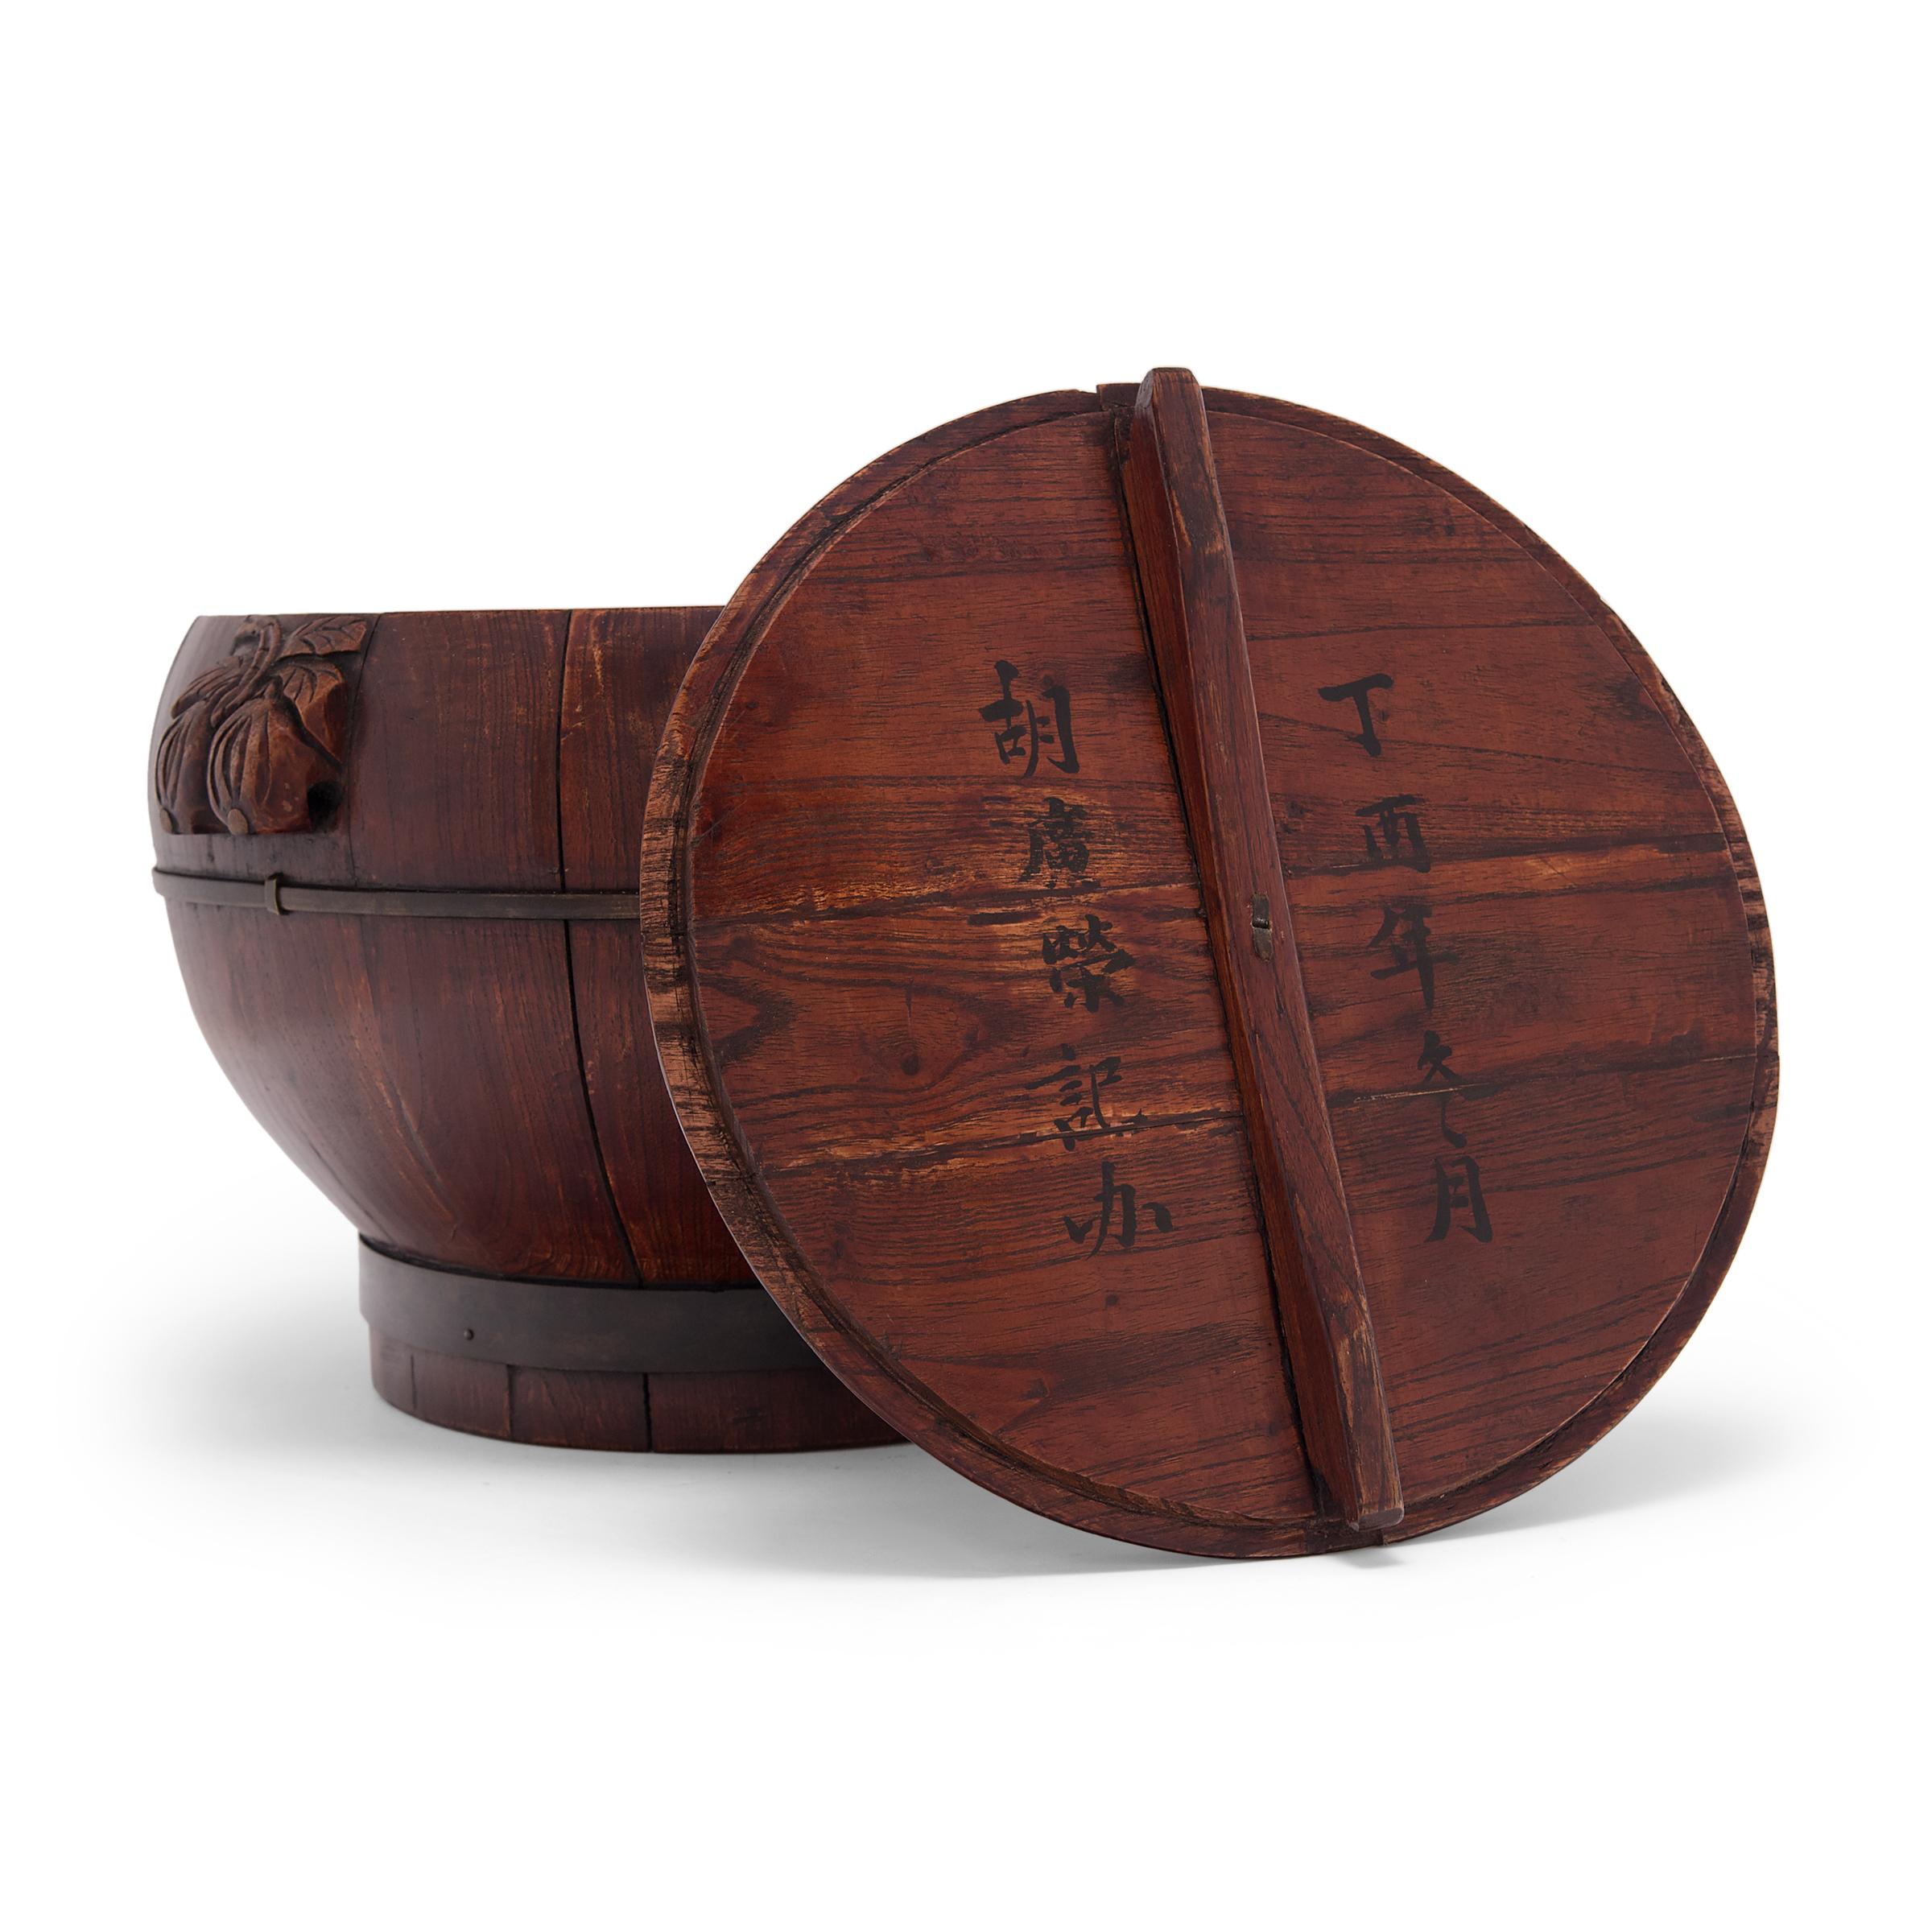 Rustic Chinese Round Grain Container with Offering Fruits, c. 1900 For Sale